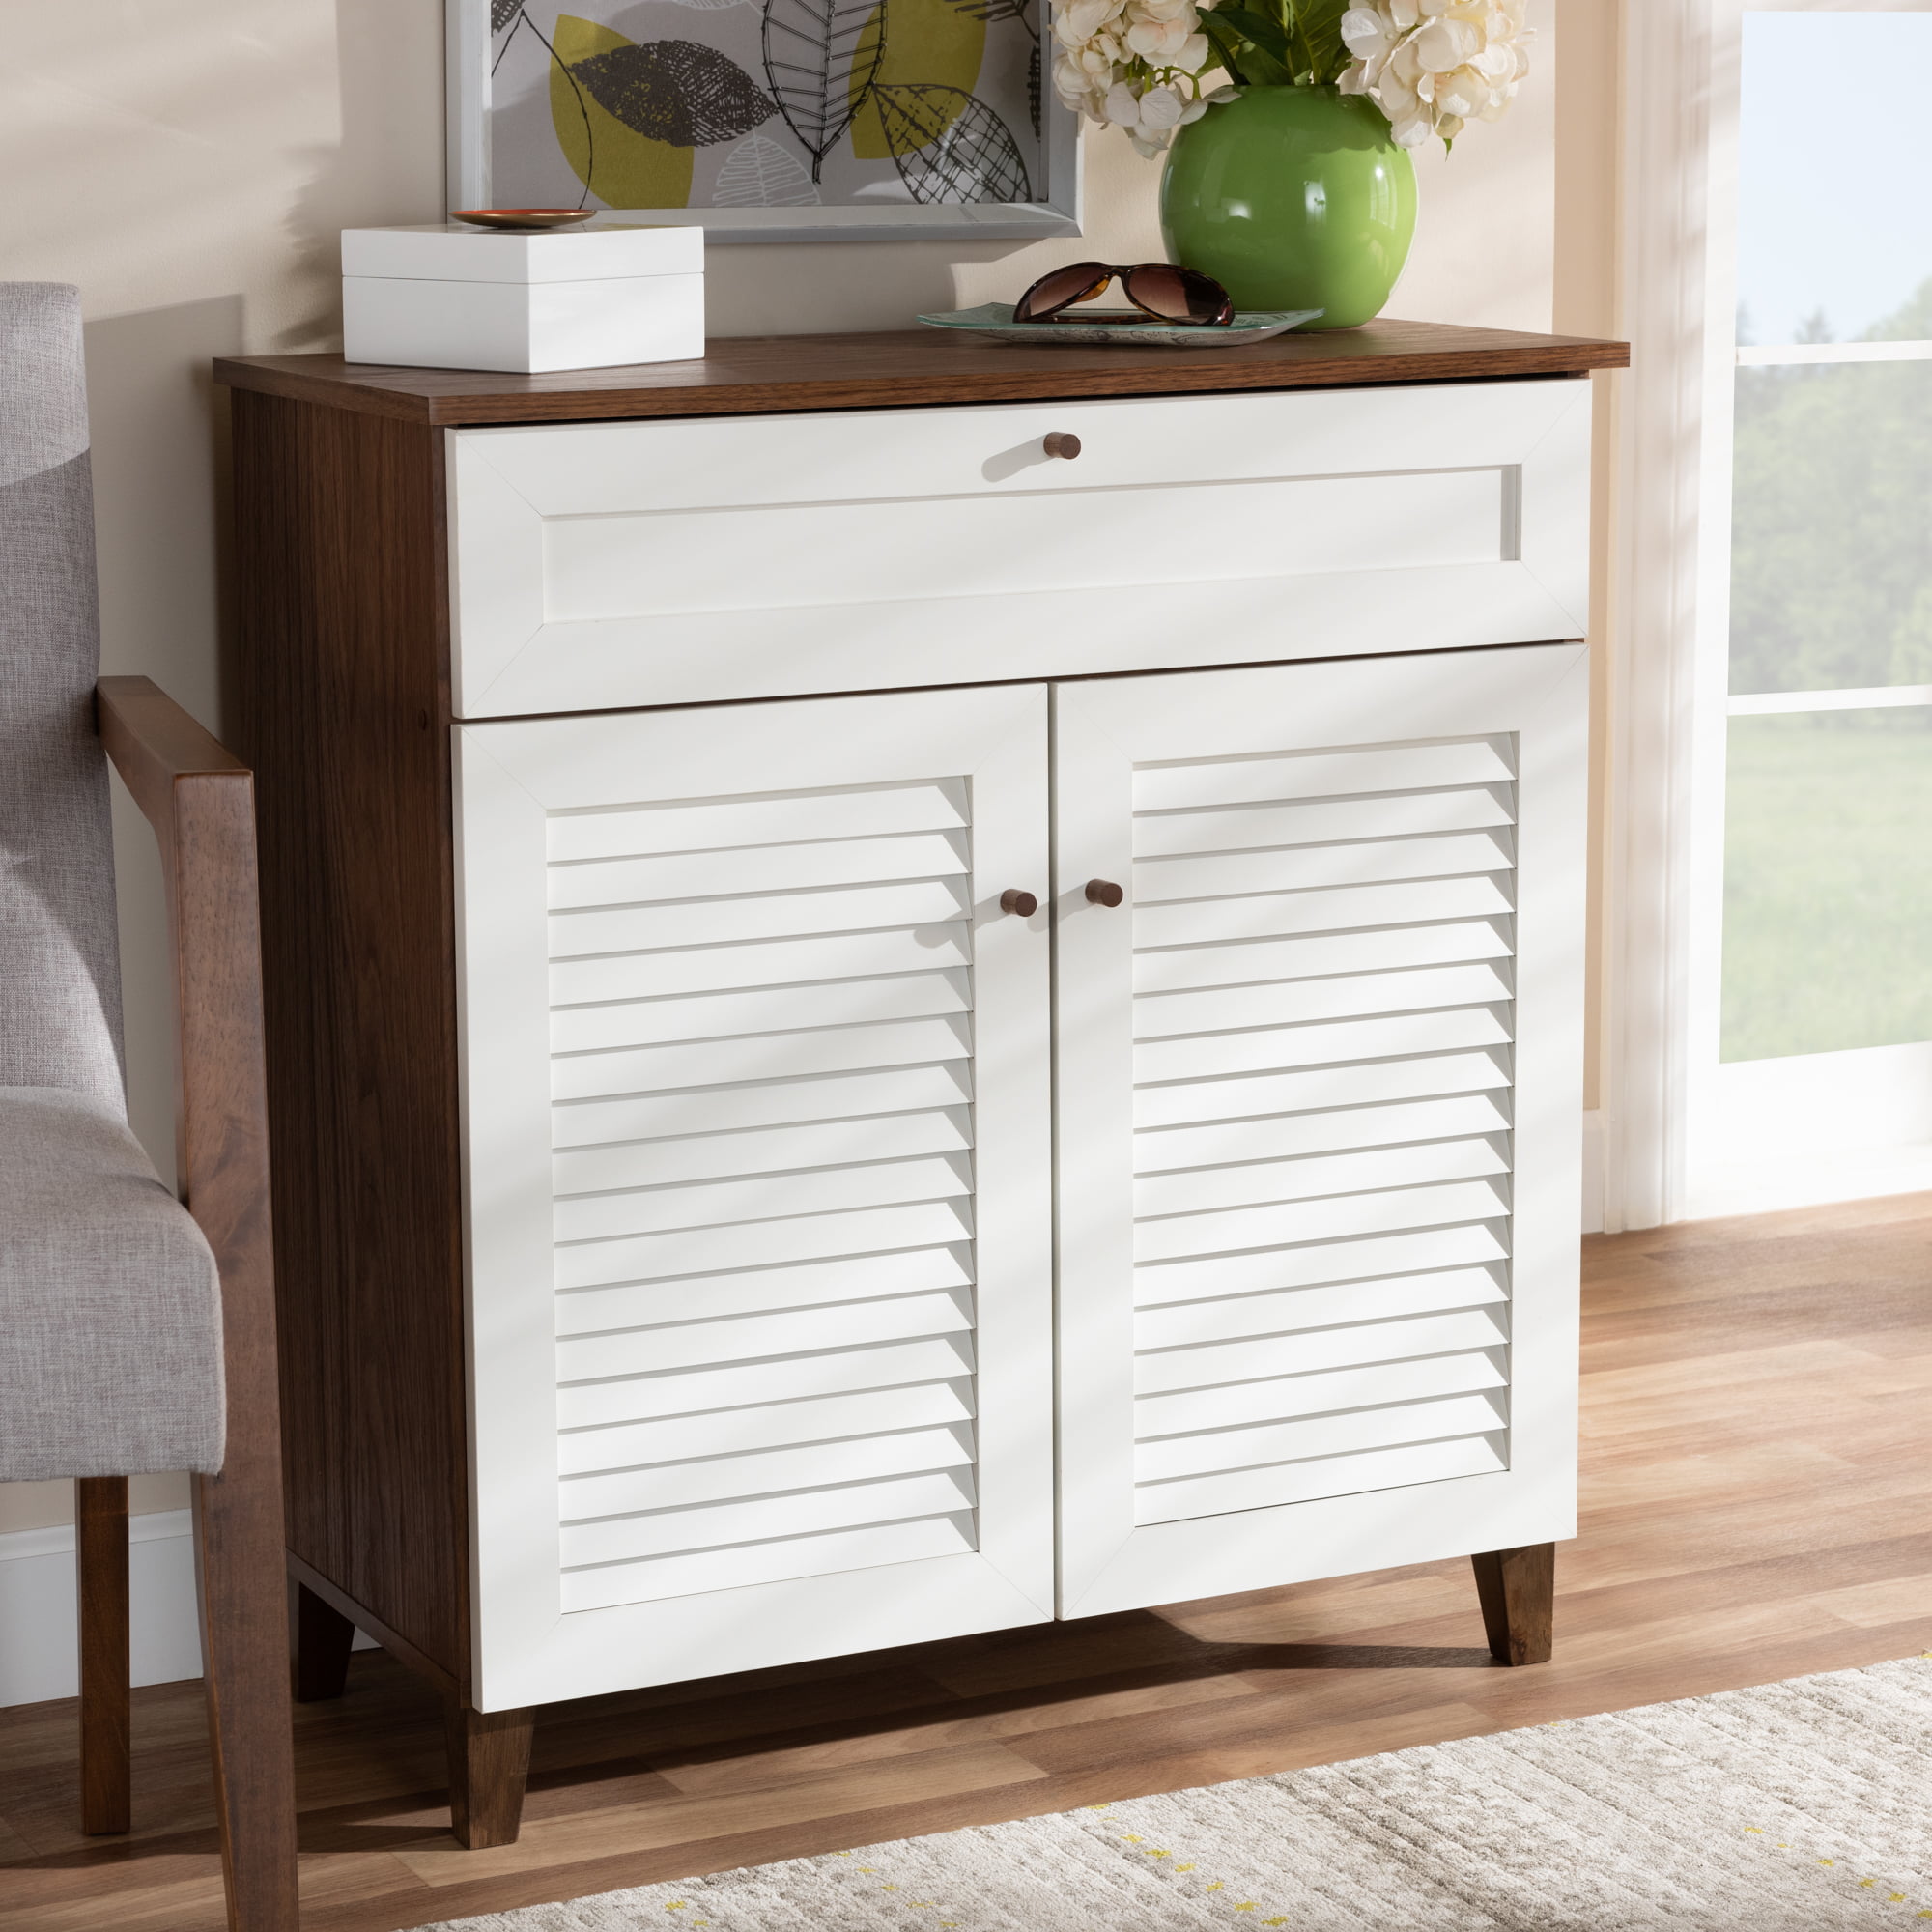 Wood Shoe Storage Cabinet With Drawer, Baxton Shoe Cabinet White